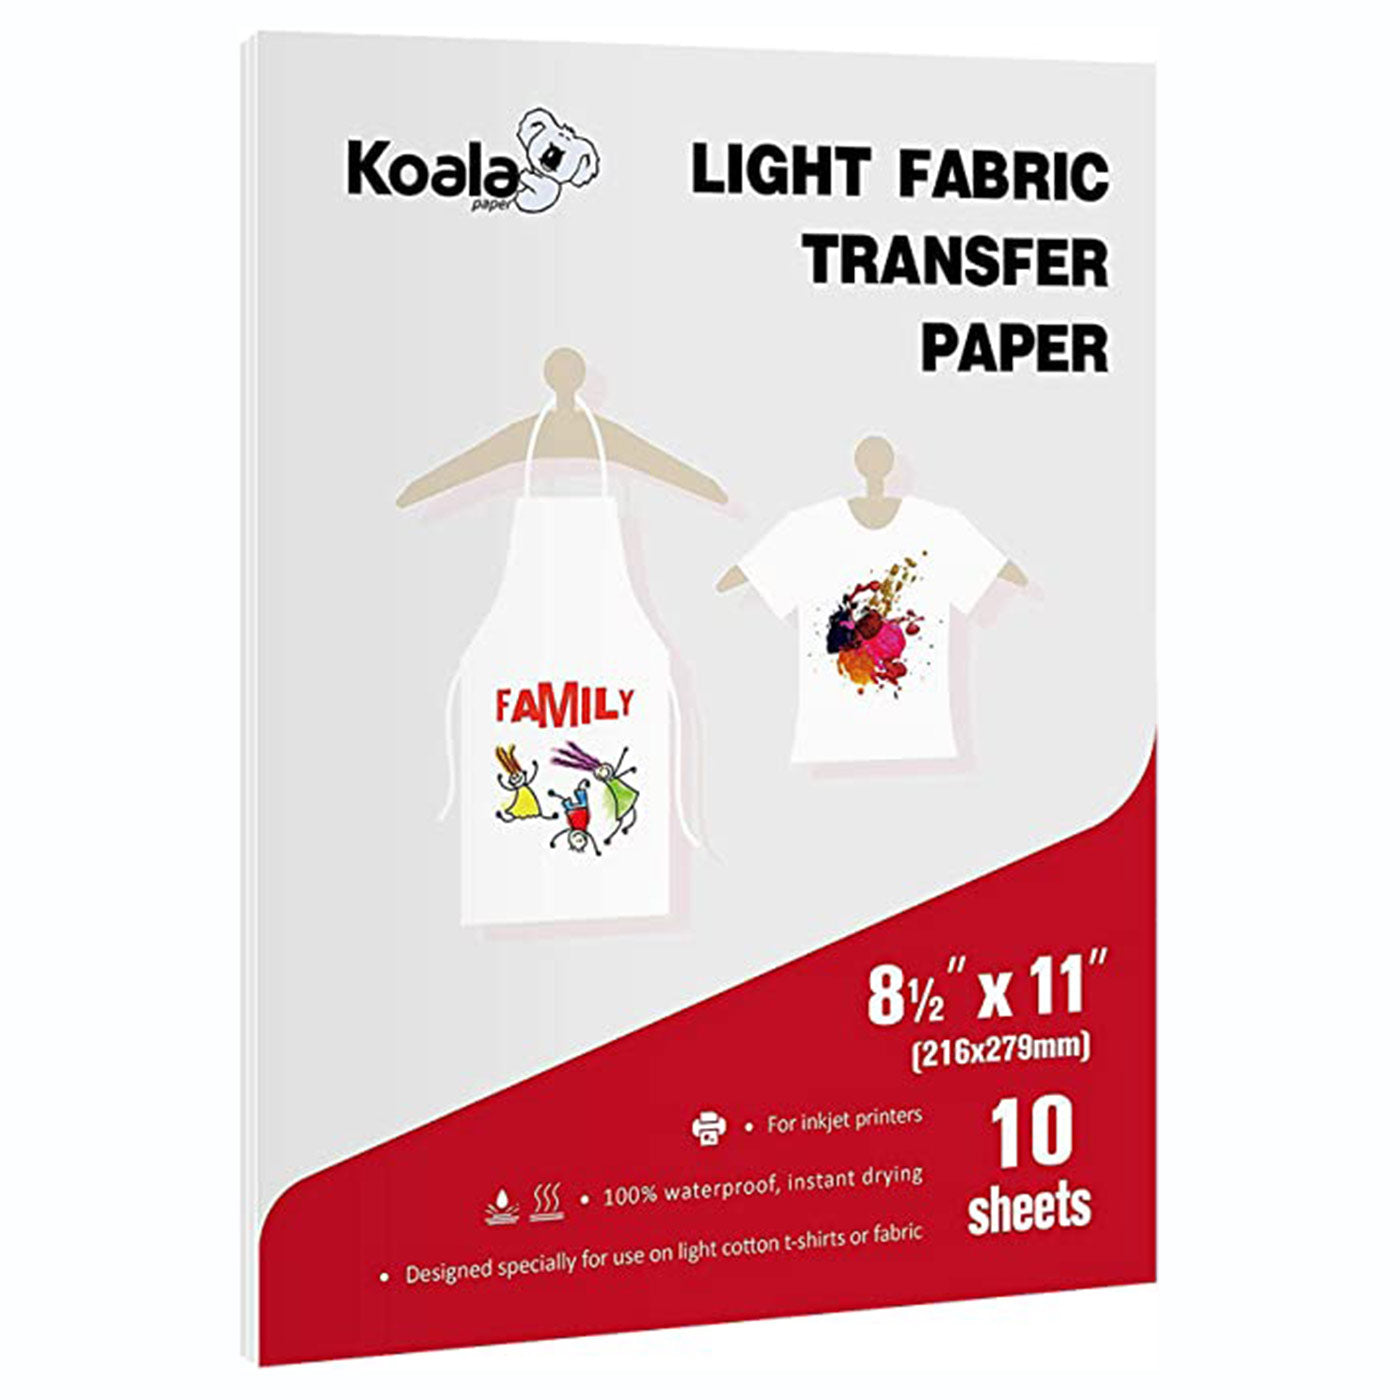 Iron on Heat Transfer Paper for White and Light Fabric, 8.5x11 T-Shirt Transfer Paper for Inkjet Printer, Pack of 10 Sheets